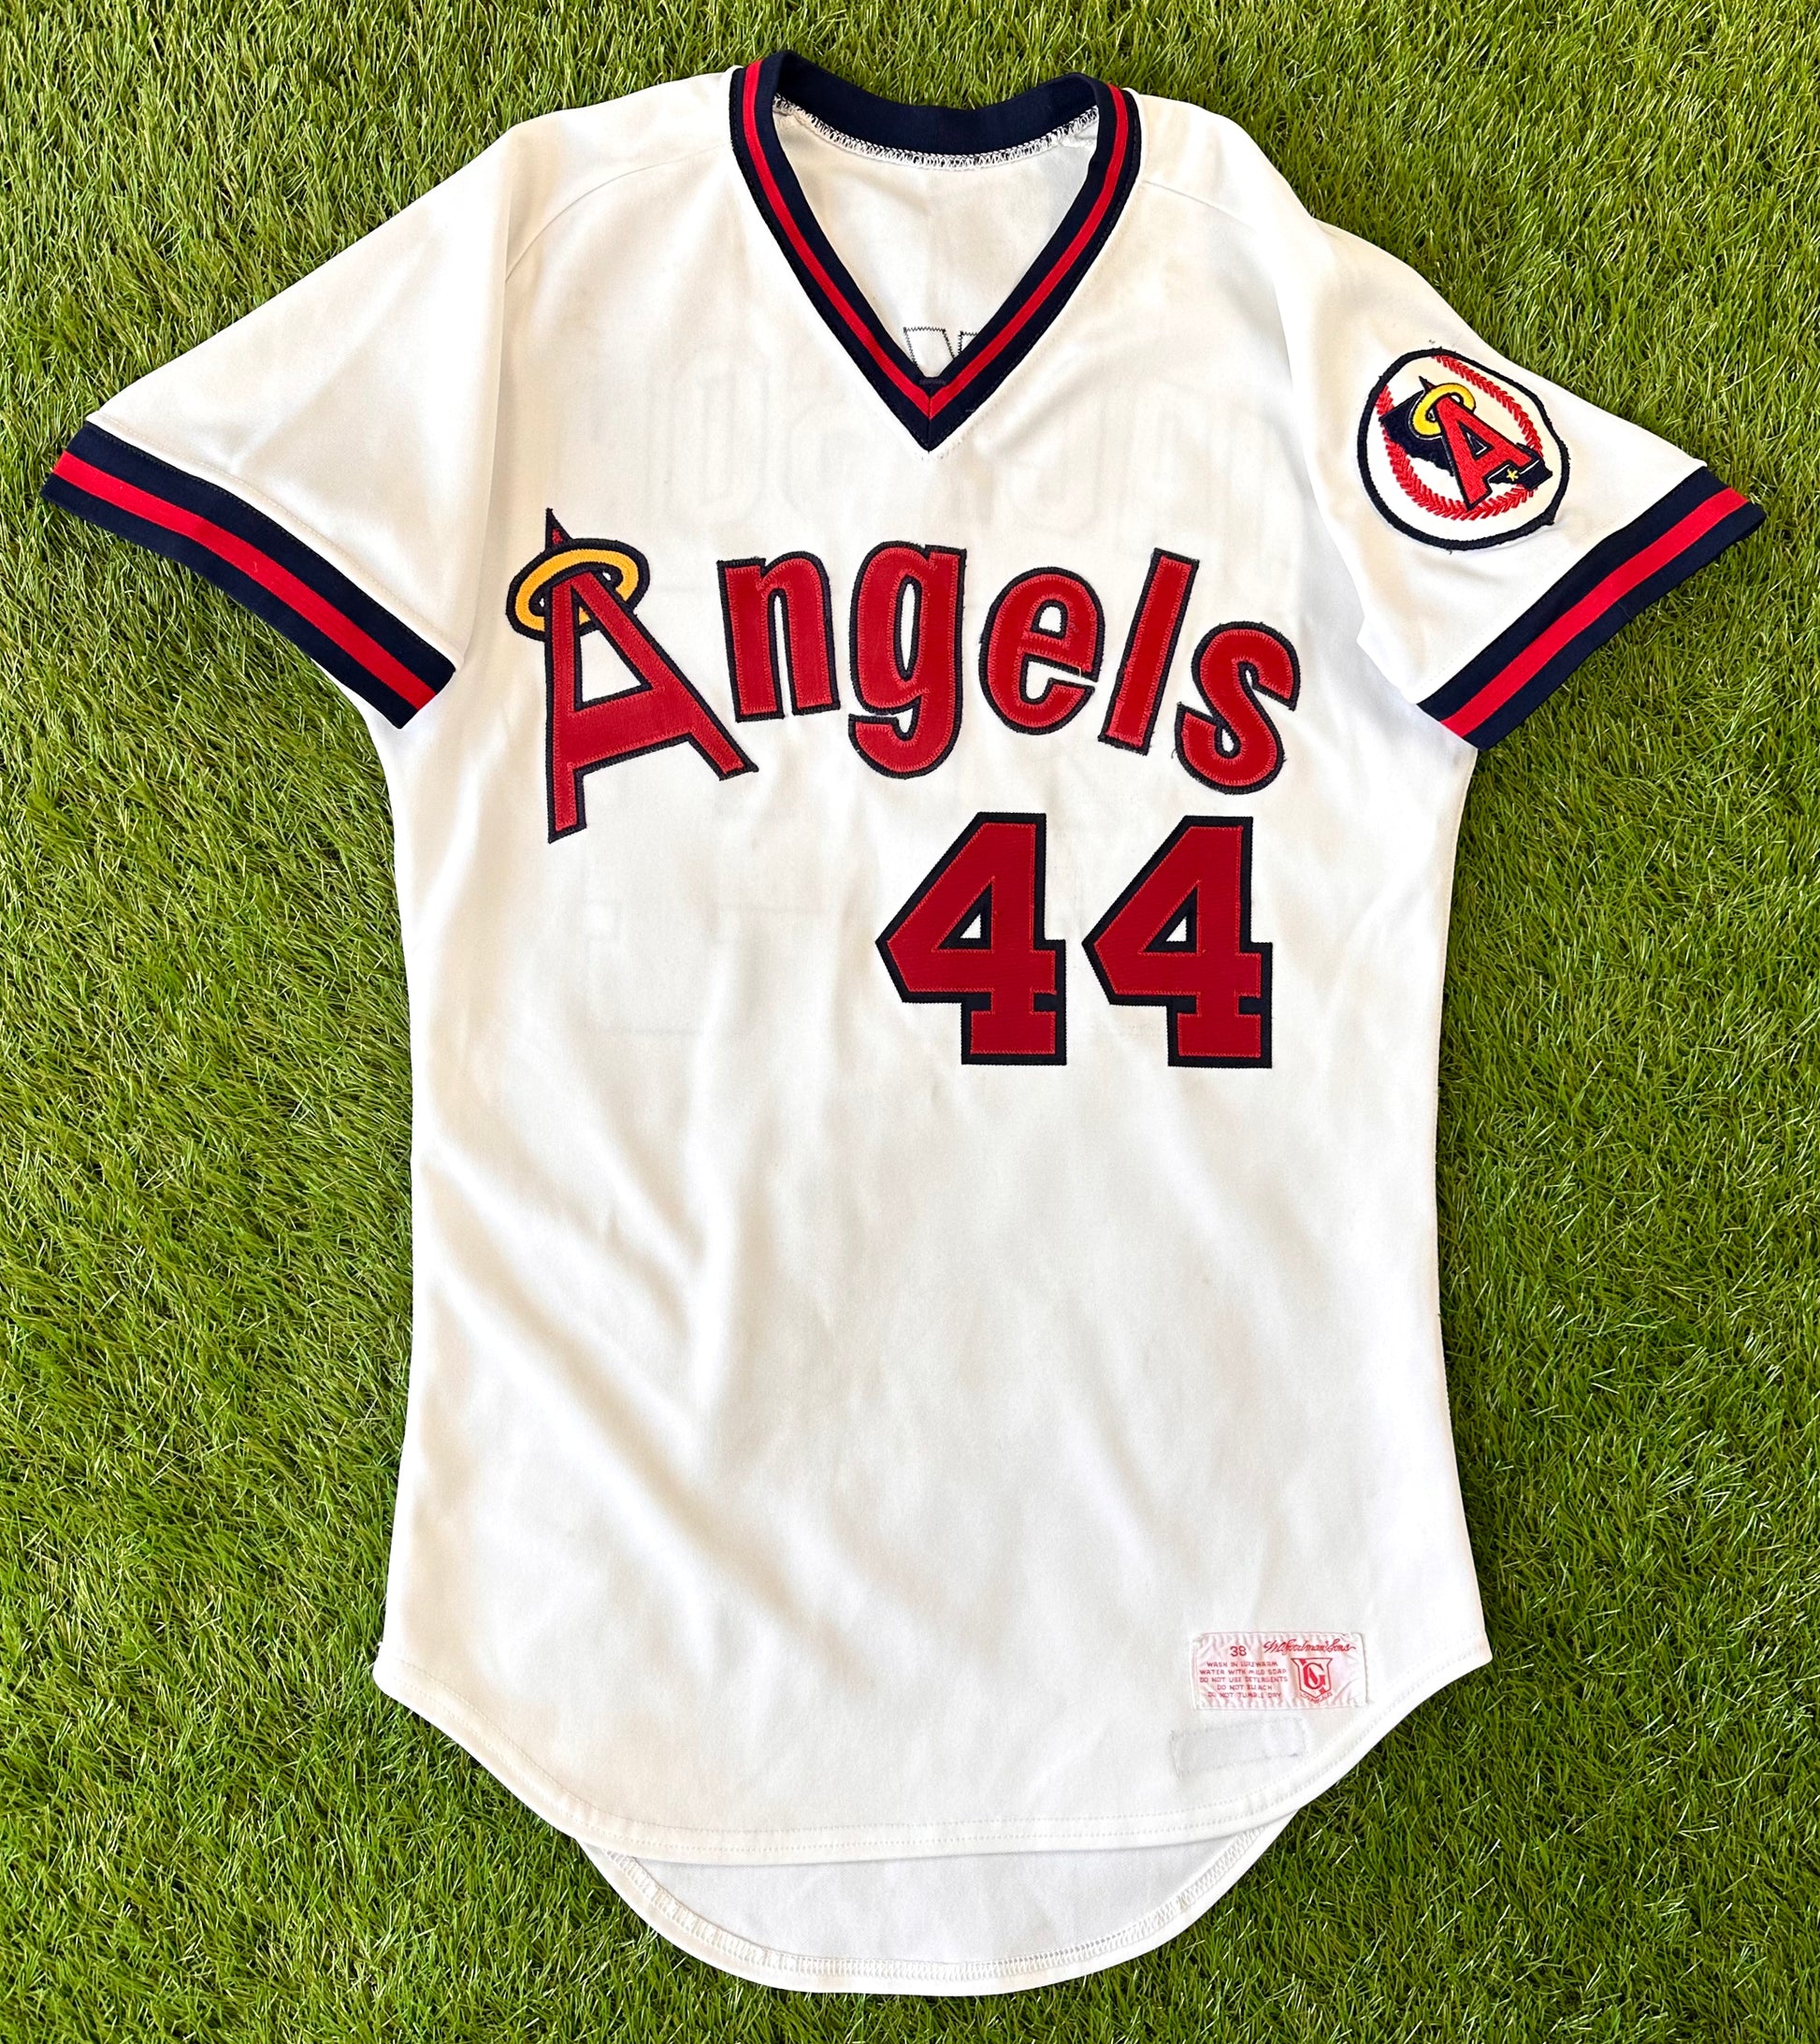 Bill Henderson: The Game Worn Guide to MLB Jerseys / The Dream Shop